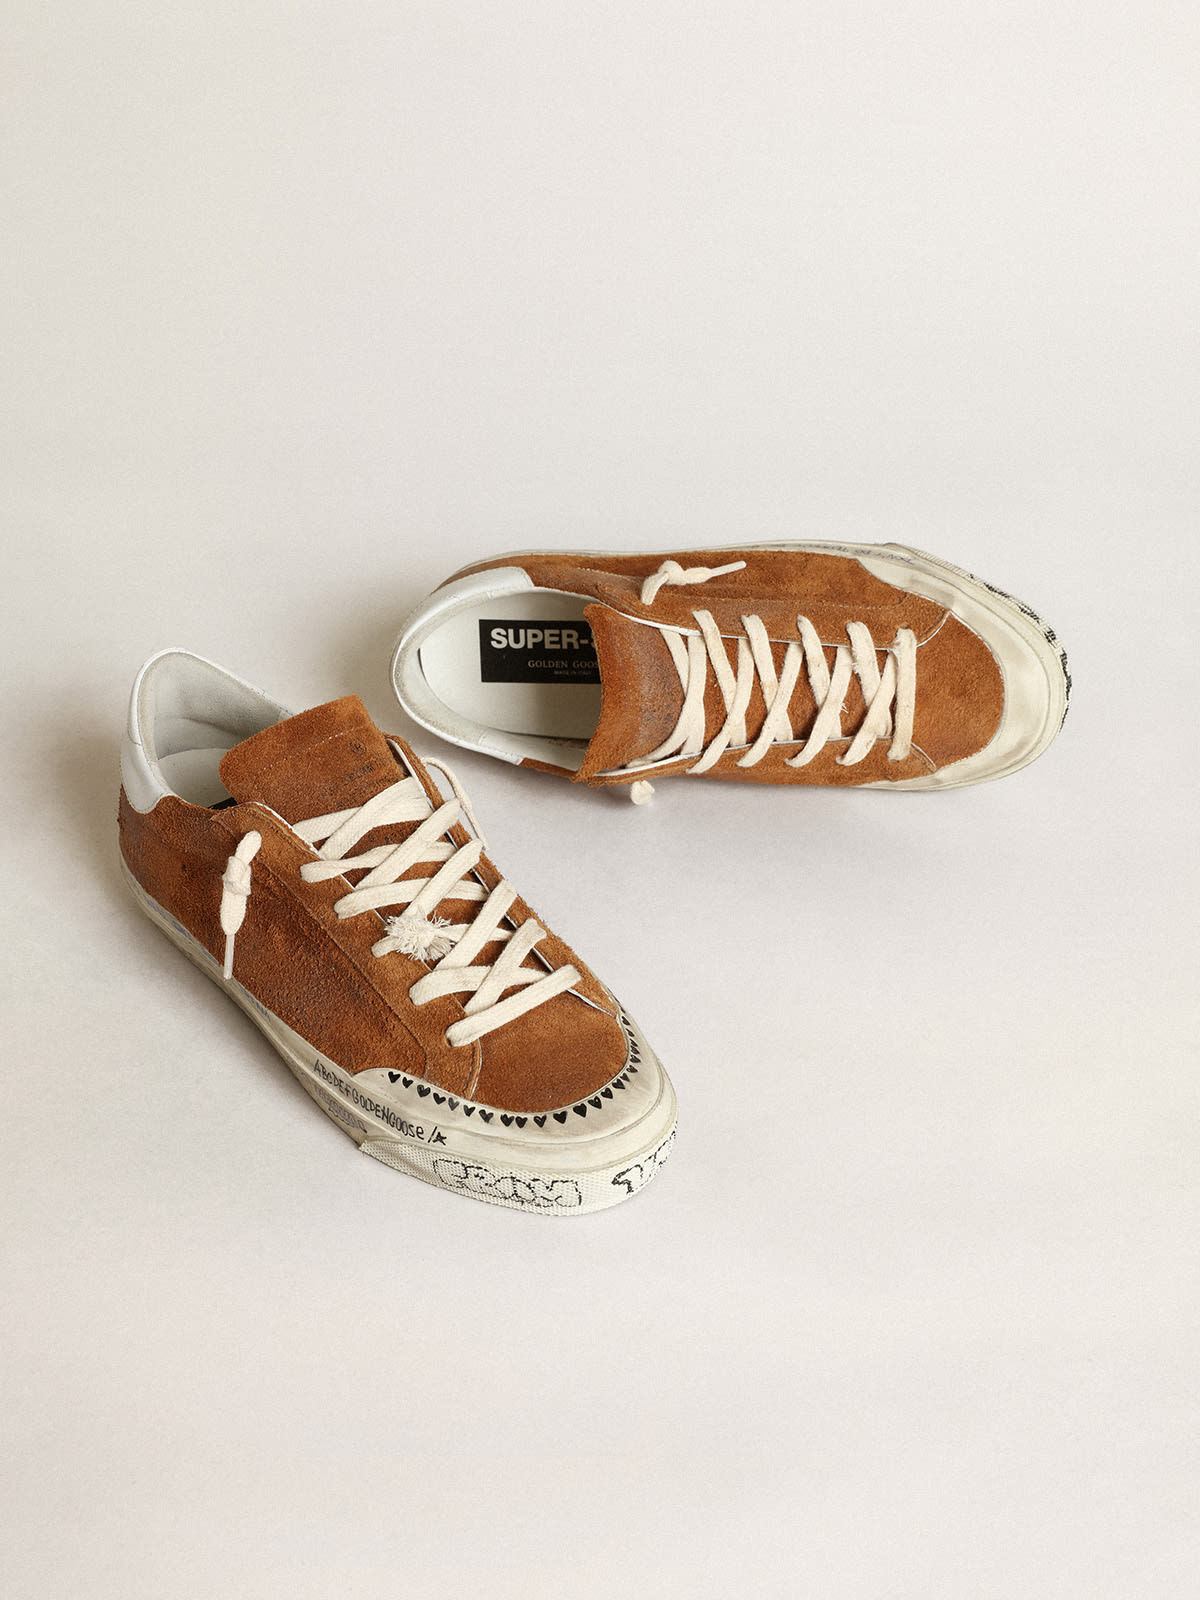 Golden Goose - Women’s Super-Star LTD in tan suede with a perforated star in 